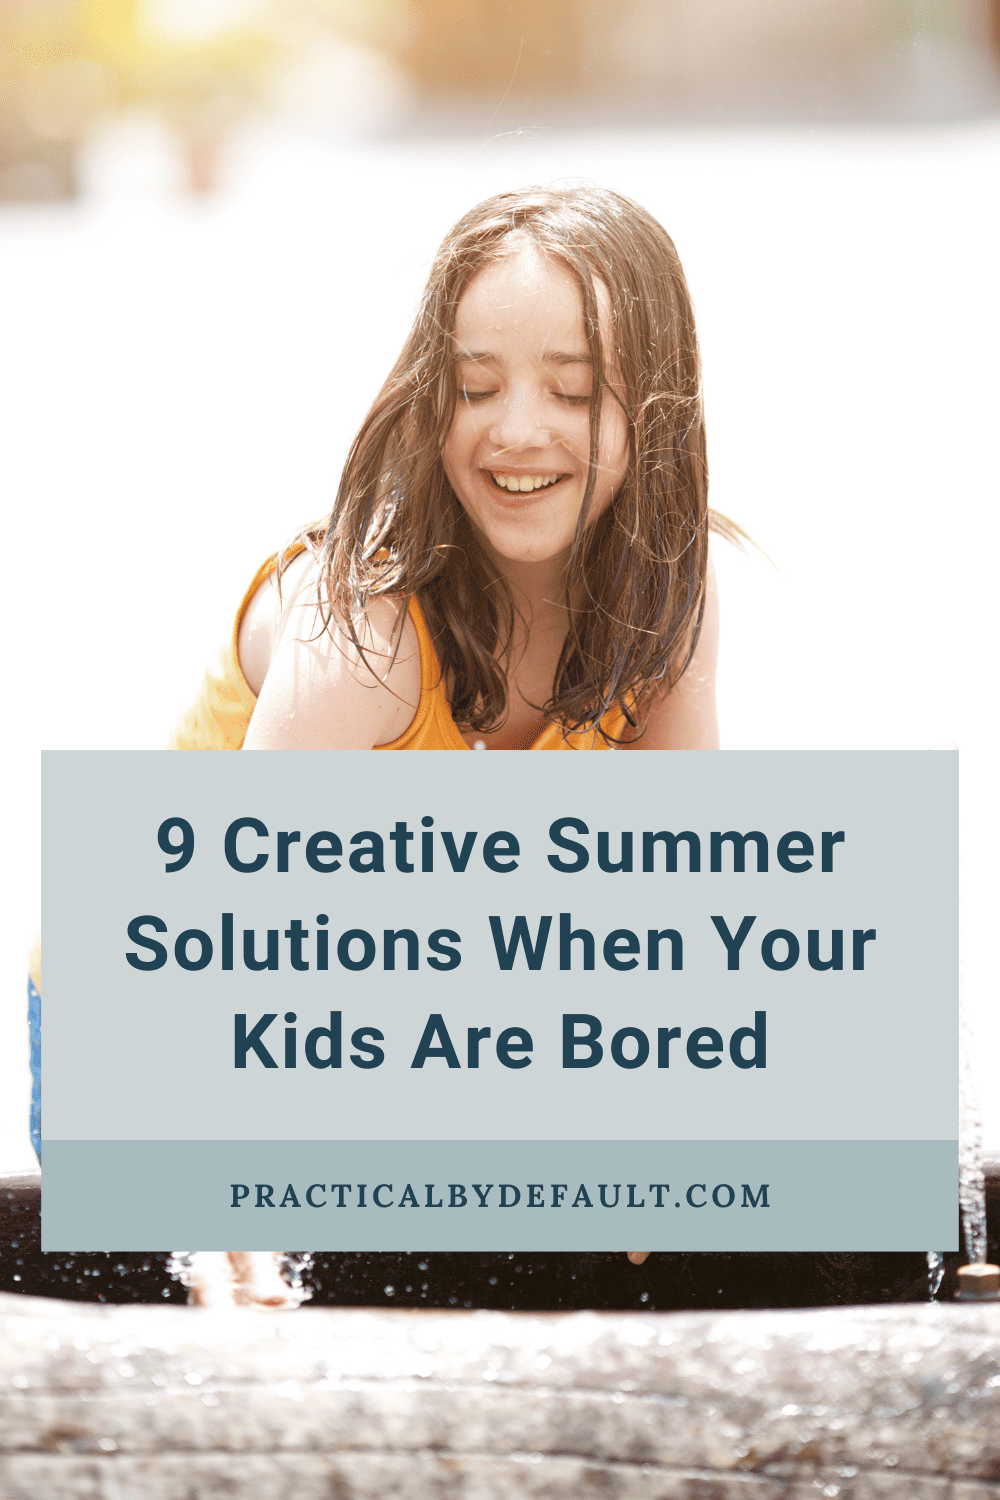 Summer Solutions When Your Kids Are Bored